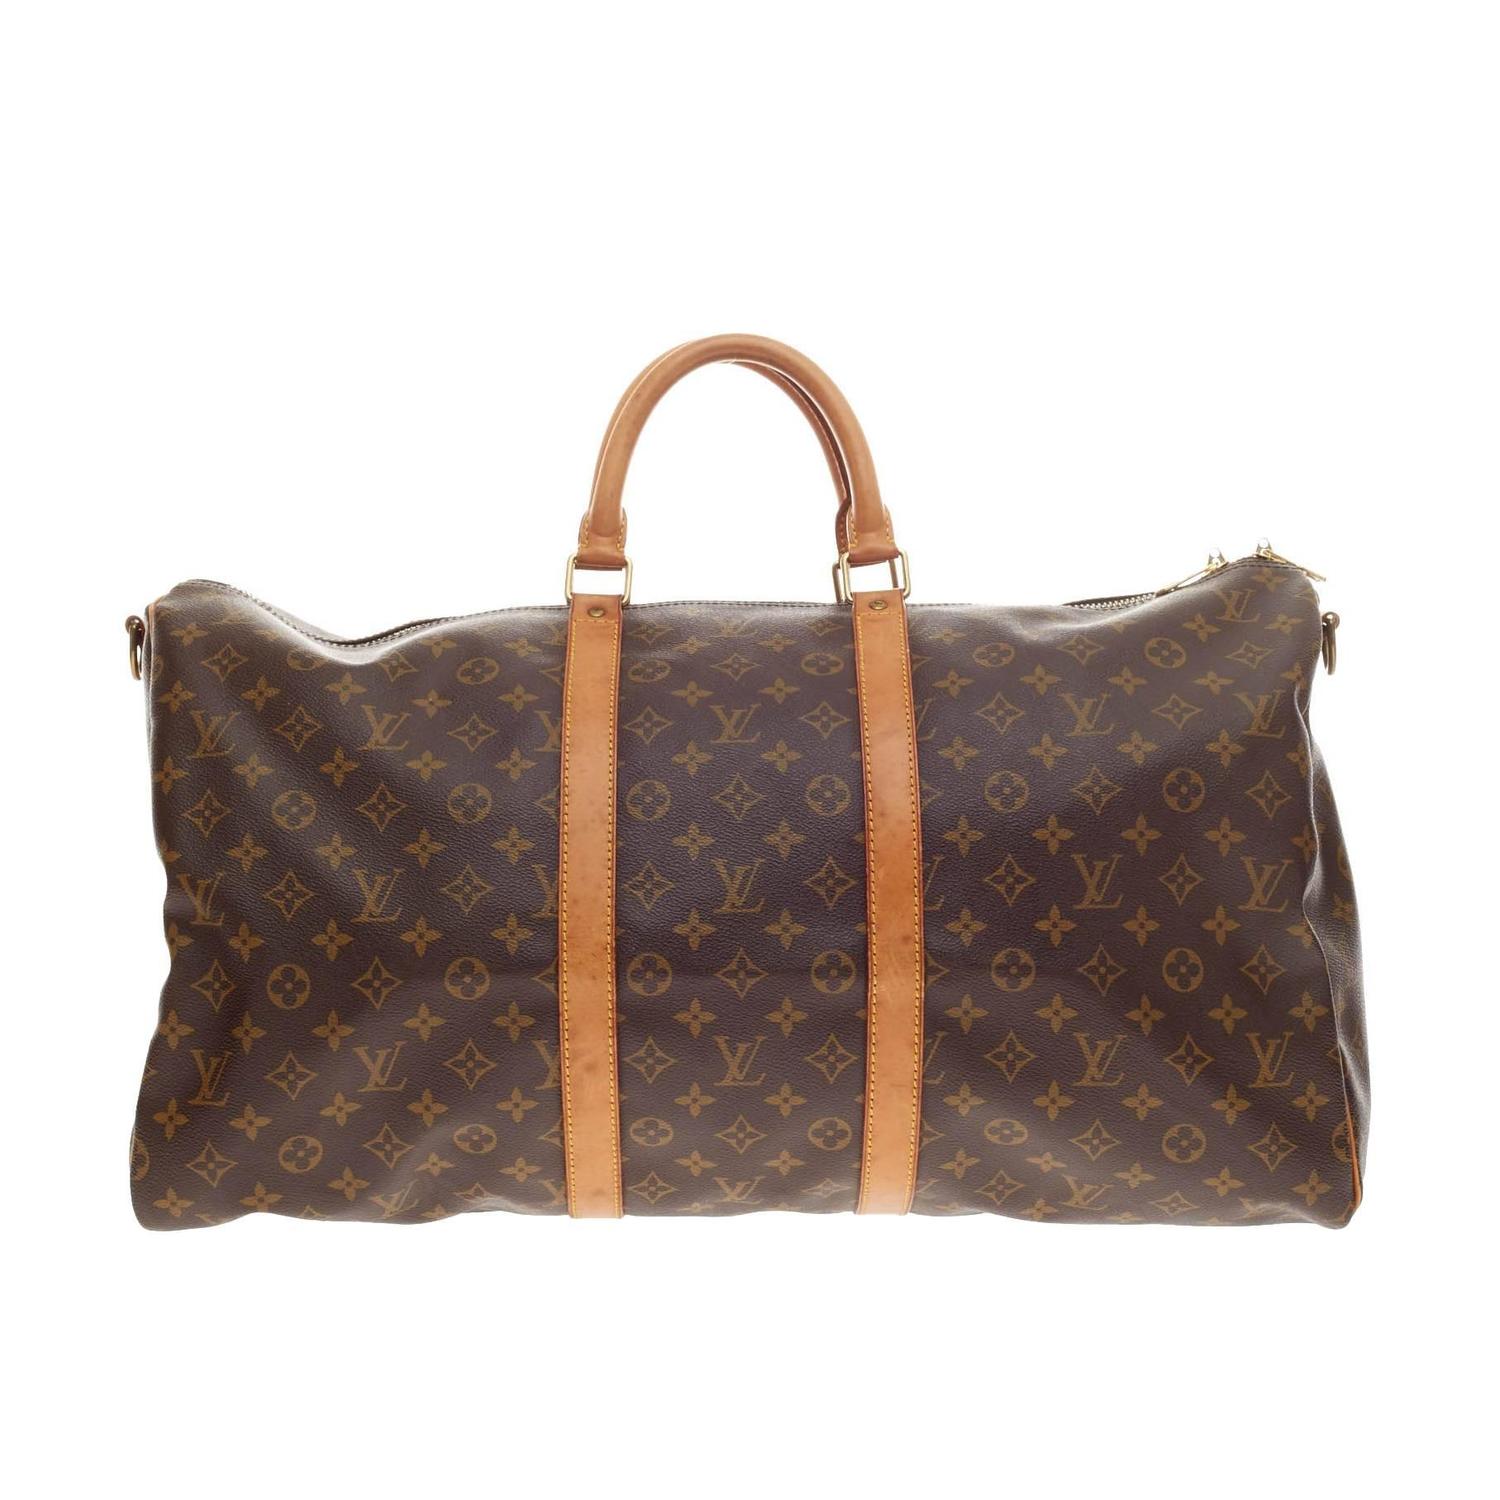 Louis Vuitton Keepall Bandouliere Monogram Canvas 55 at 1stdibs